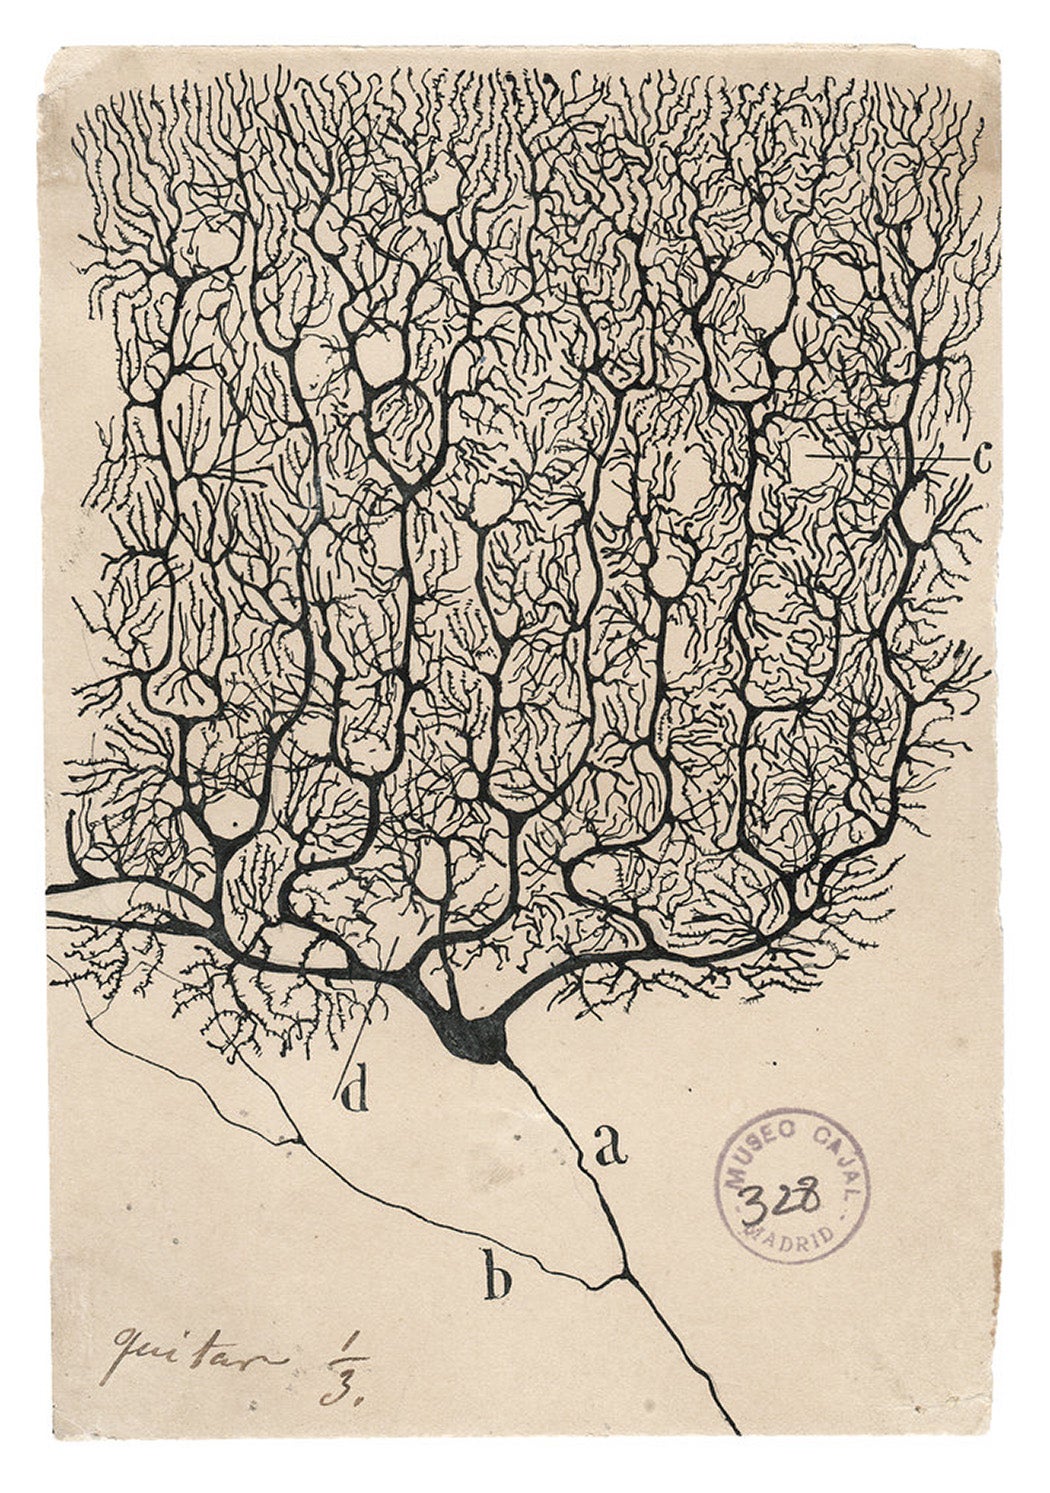 Illustration by Cajal of a purkinje neuron from the human cerebellum